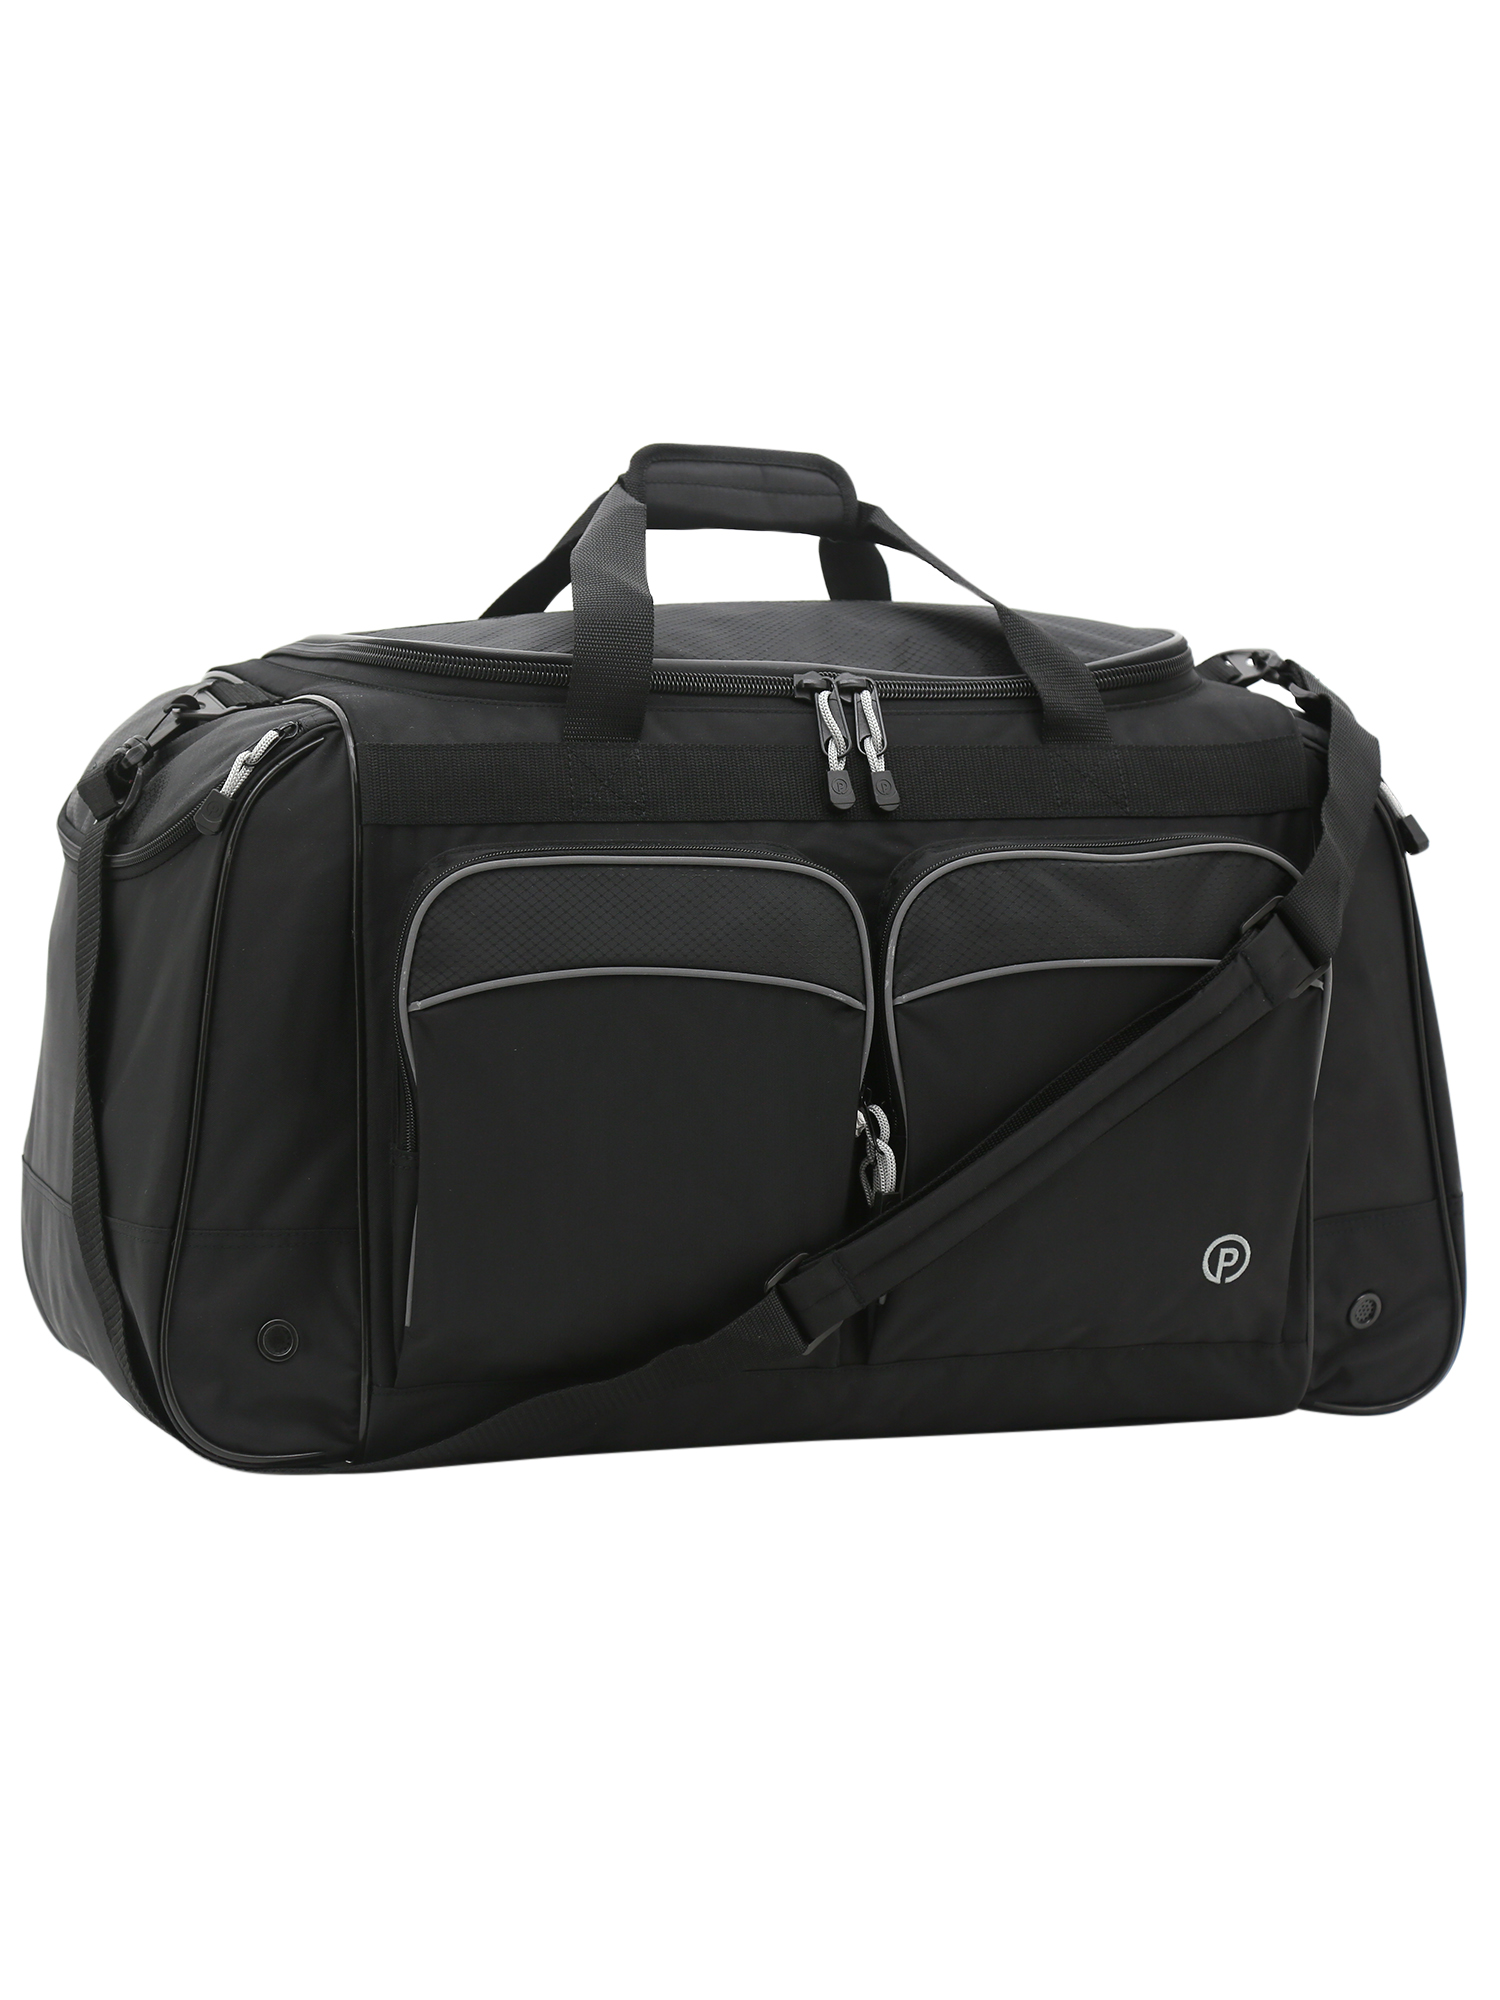 Protégé 28" Polyester Sport and Travel Duffel Bag, Black - image 1 of 6